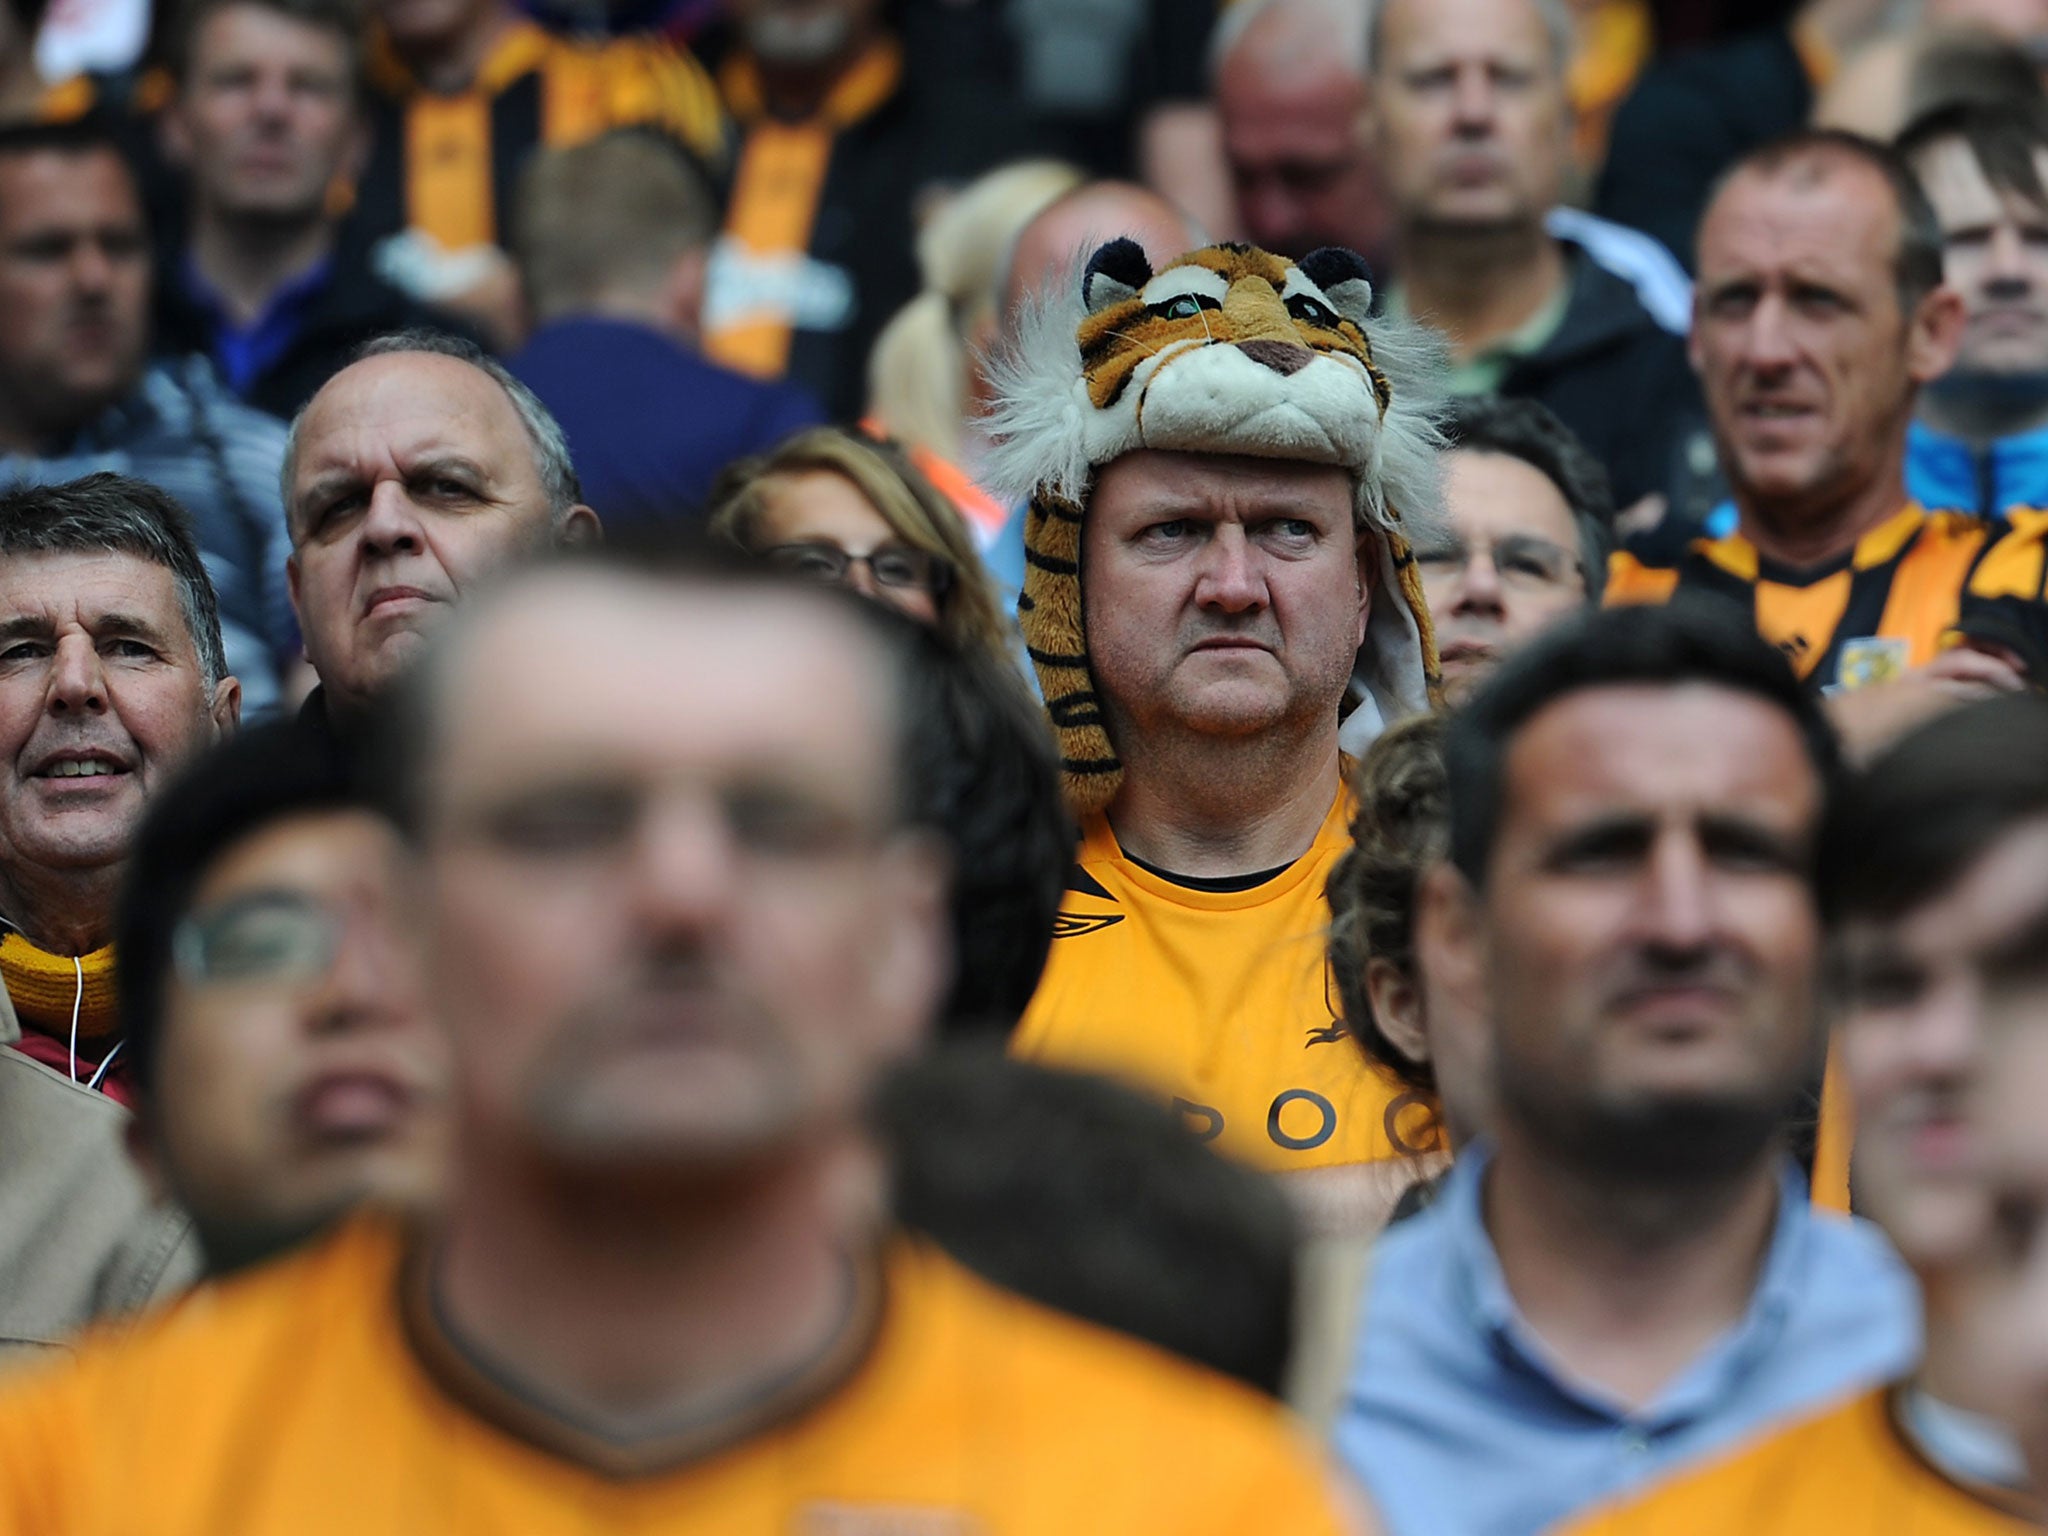 Not everyone is happy at Hull City's adoption of the name Tigers